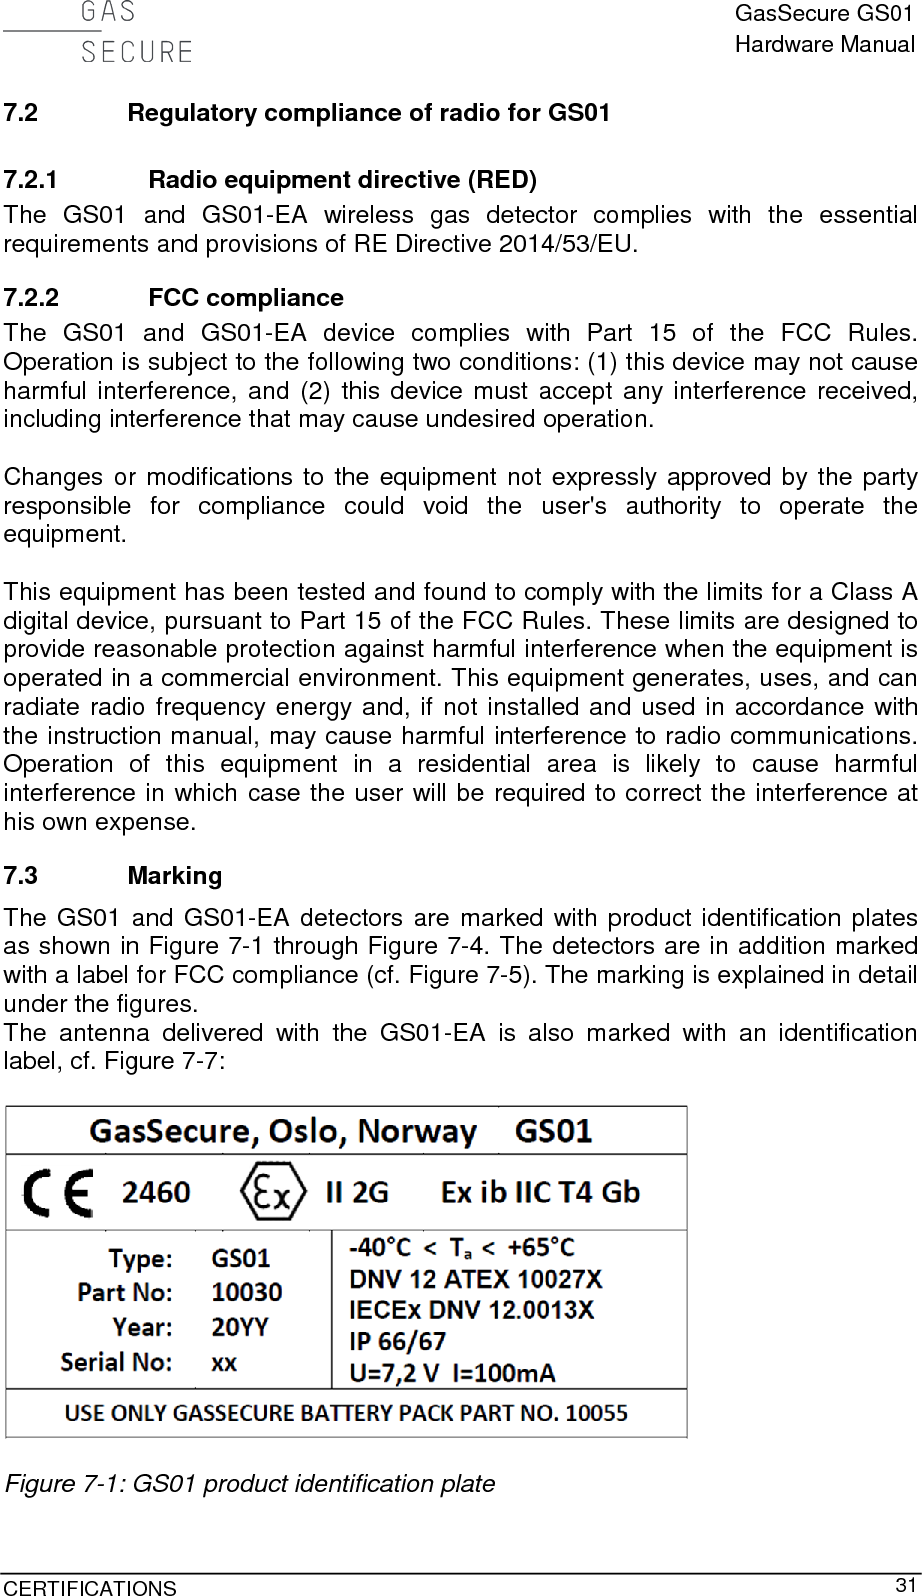  GasSecure GS01 Hardware Manual  CERTIFICATIONS     31 7.2 Regulatory compliance of radio for GS01 7.2.1 Radio equipment directive (RED) The GS01 and GS01-EA  wireless gas detector complies with the essential requirements and provisions of RE Directive 2014/53/EU. 7.2.2 FCC compliance The GS01 and GS01-EA  device complies with Part 15 of the FCC Rules. Operation is subject to the following two conditions: (1) this device may not cause harmful interference, and (2) this device must accept any interference received, including interference that may cause undesired operation.  Changes or modifications to the equipment not expressly approved by the party responsible for compliance could void the user&apos;s authority to operate the equipment.  This equipment has been tested and found to comply with the limits for a Class A digital device, pursuant to Part 15 of the FCC Rules. These limits are designed to provide reasonable protection against harmful interference when the equipment is operated in a commercial environment. This equipment generates, uses, and can radiate radio frequency energy and, if not installed and used in accordance with the instruction manual, may cause harmful interference to radio communications. Operation of this equipment in a residential area is likely to cause harmful interference in which case the user will be required to correct the interference at his own expense. 7.3 Marking The GS01 and GS01-EA detectors are marked with product identification plates as shown in Figure 7-1 through Figure 7-4. The detectors are in addition marked with a label for FCC compliance (cf. Figure 7-5). The marking is explained in detail under the figures. The antenna delivered with the GS01-EA is also marked with an identification label, cf. Figure 7-7:    Figure 7-1: GS01 product identification plate 